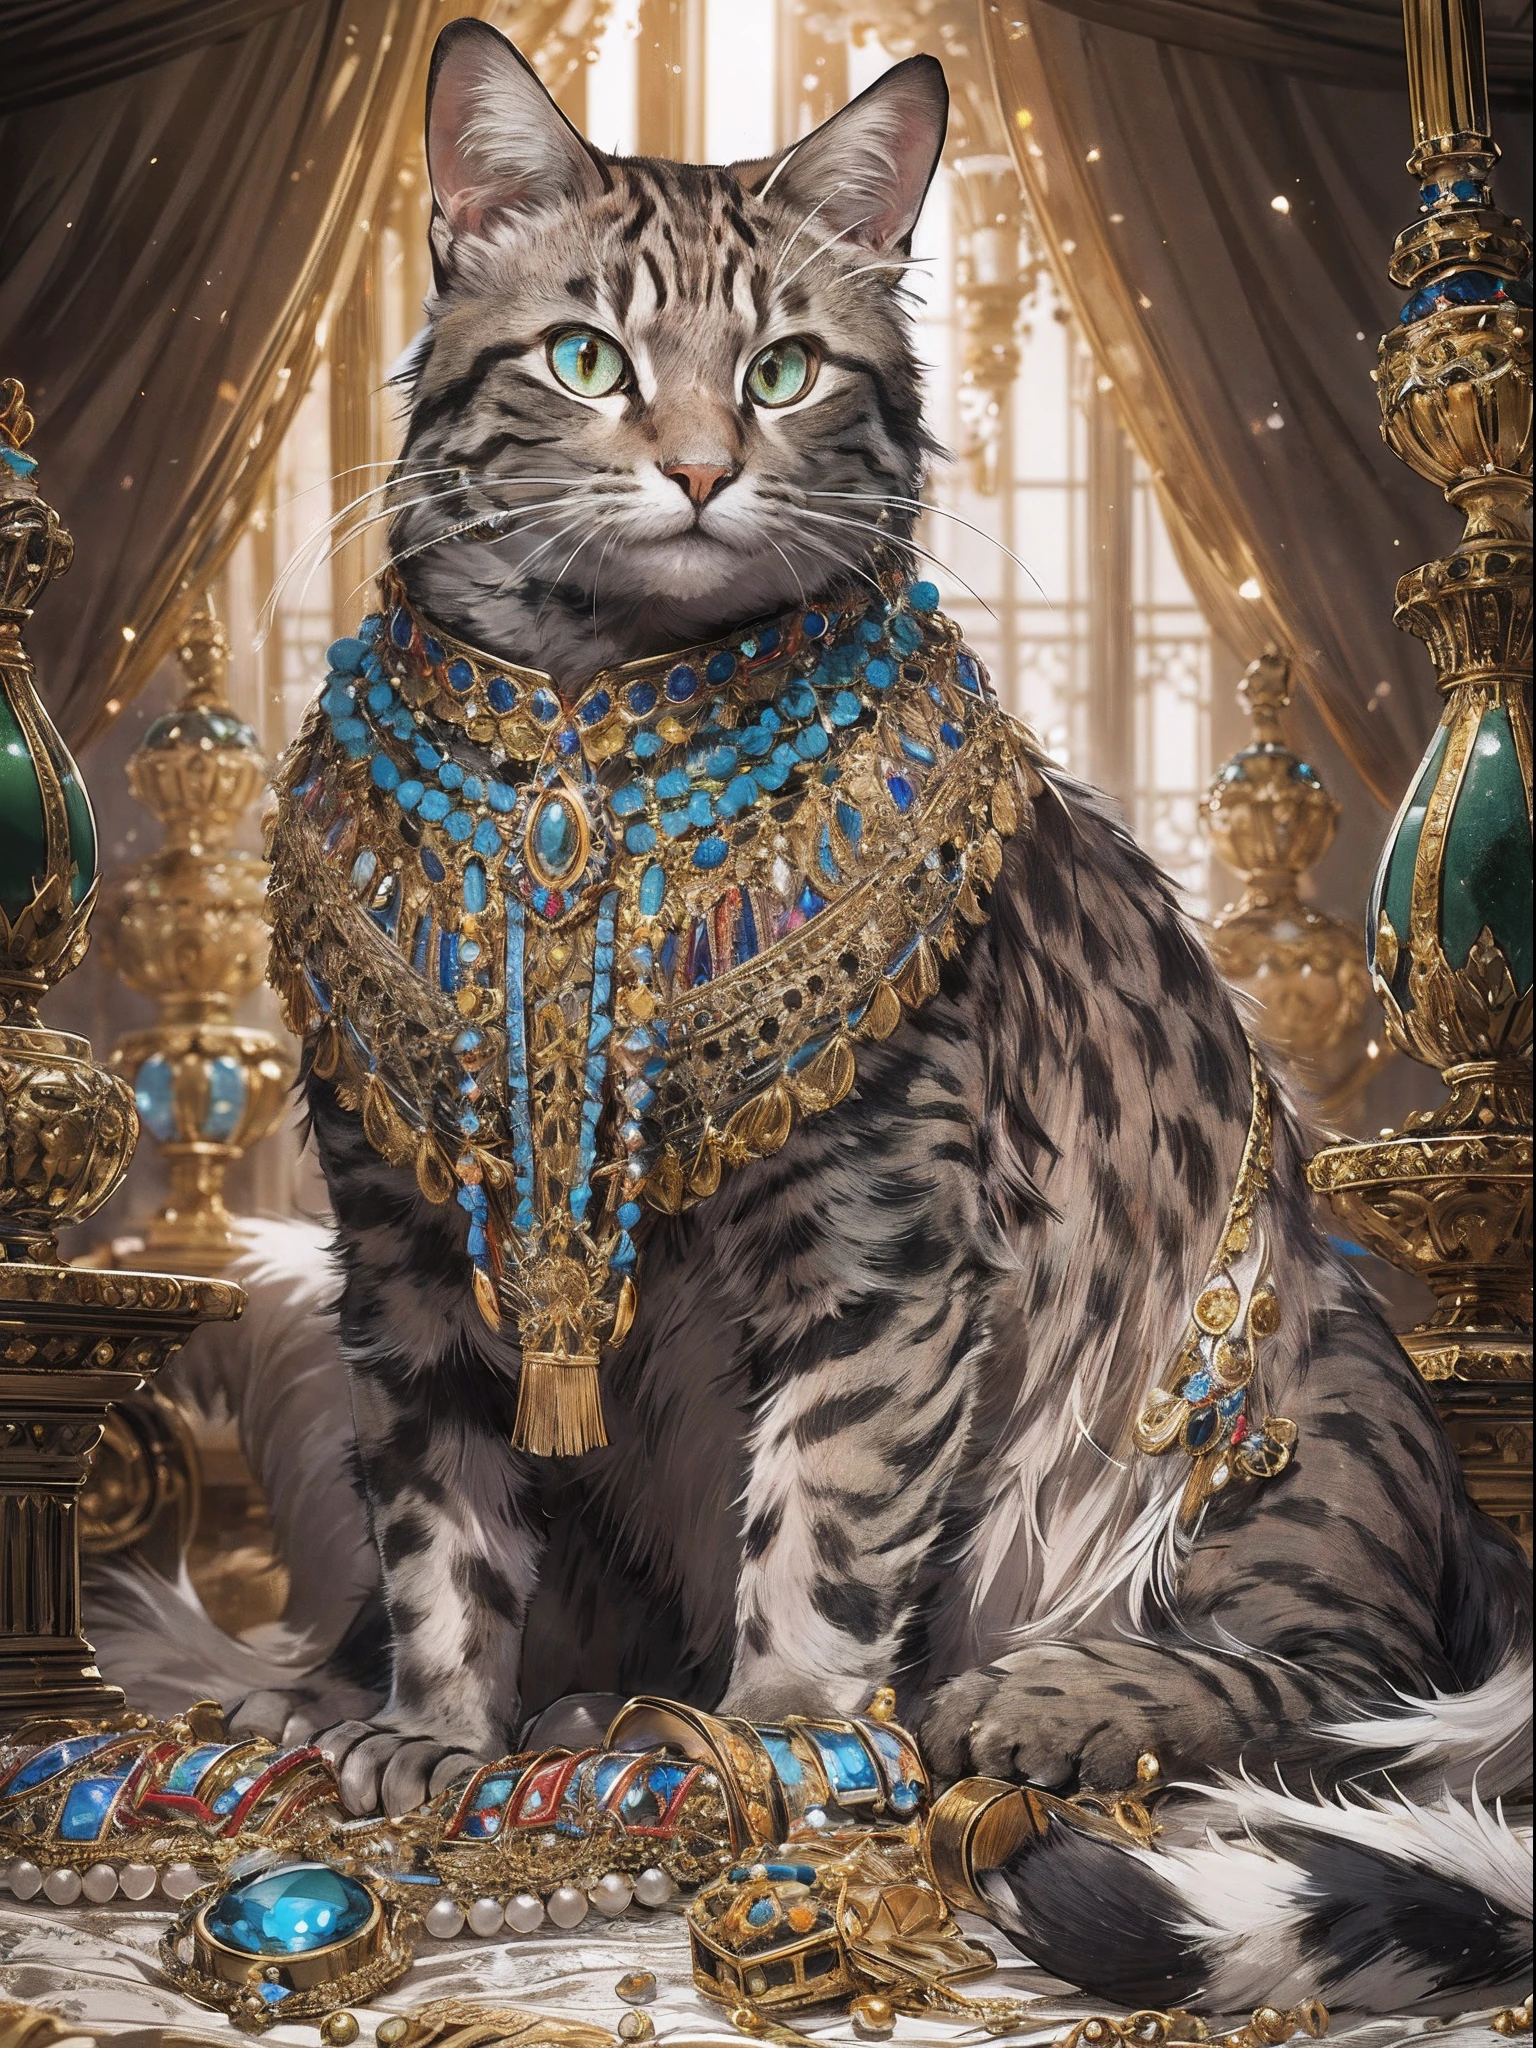 The King's Cat with a Lot of Jewels，is standing